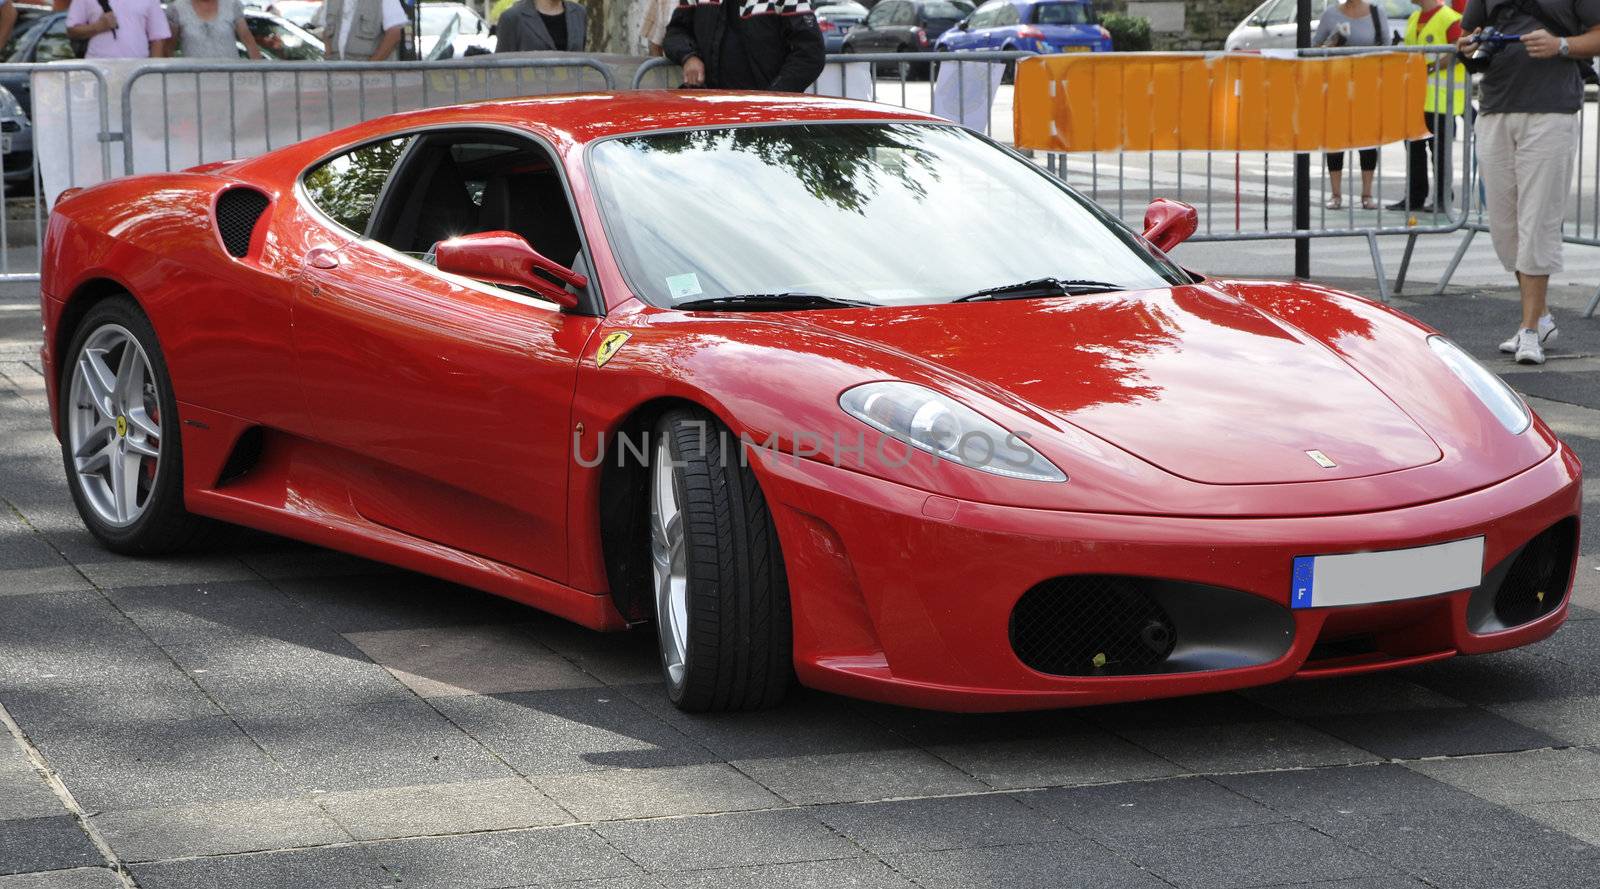 Front view of a F430 Ferrari during a meeting